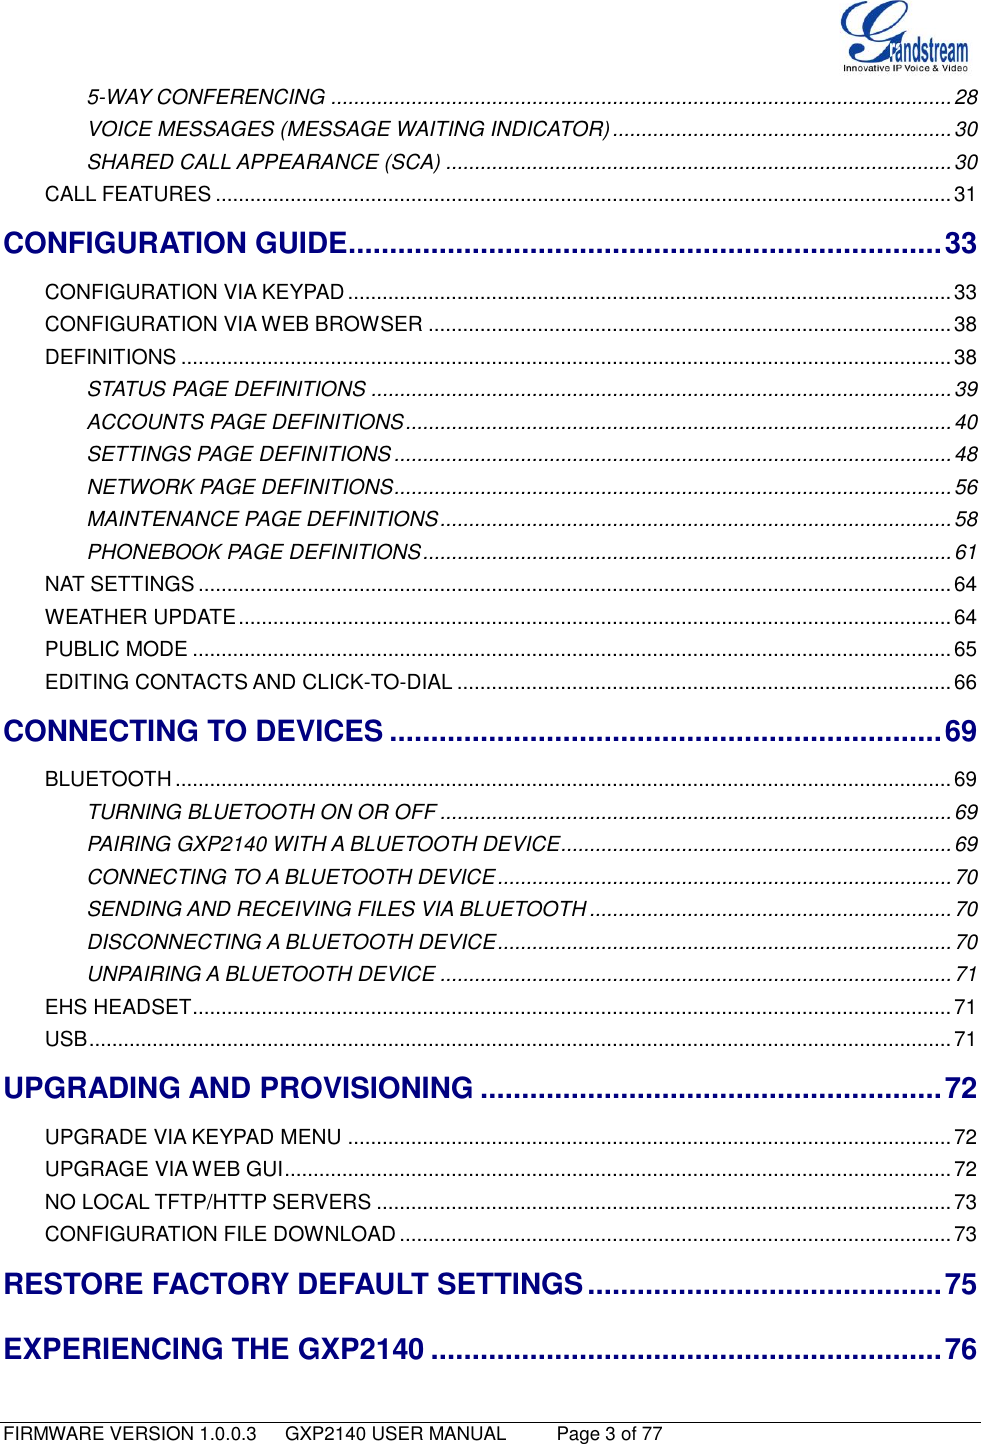   FIRMWARE VERSION 1.0.0.3   GXP2140 USER MANUAL     Page 3 of 77                                   5-WAY CONFERENCING ............................................................................................................ 28 VOICE MESSAGES (MESSAGE WAITING INDICATOR) ........................................................... 30 SHARED CALL APPEARANCE (SCA) ........................................................................................ 30 CALL FEATURES ................................................................................................................................ 31 CONFIGURATION GUIDE ........................................................................ 33 CONFIGURATION VIA KEYPAD ......................................................................................................... 33 CONFIGURATION VIA WEB BROWSER ........................................................................................... 38 DEFINITIONS ...................................................................................................................................... 38 STATUS PAGE DEFINITIONS ..................................................................................................... 39 ACCOUNTS PAGE DEFINITIONS ............................................................................................... 40 SETTINGS PAGE DEFINITIONS ................................................................................................. 48 NETWORK PAGE DEFINITIONS ................................................................................................. 56 MAINTENANCE PAGE DEFINITIONS ......................................................................................... 58 PHONEBOOK PAGE DEFINITIONS ............................................................................................ 61 NAT SETTINGS ................................................................................................................................... 64 WEATHER UPDATE ............................................................................................................................ 64 PUBLIC MODE .................................................................................................................................... 65 EDITING CONTACTS AND CLICK-TO-DIAL ...................................................................................... 66 CONNECTING TO DEVICES ................................................................... 69 BLUETOOTH ....................................................................................................................................... 69 TURNING BLUETOOTH ON OR OFF ......................................................................................... 69 PAIRING GXP2140 WITH A BLUETOOTH DEVICE .................................................................... 69 CONNECTING TO A BLUETOOTH DEVICE ............................................................................... 70 SENDING AND RECEIVING FILES VIA BLUETOOTH ............................................................... 70 DISCONNECTING A BLUETOOTH DEVICE ............................................................................... 70 UNPAIRING A BLUETOOTH DEVICE ......................................................................................... 71 EHS HEADSET .................................................................................................................................... 71 USB ...................................................................................................................................................... 71 UPGRADING AND PROVISIONING ........................................................ 72 UPGRADE VIA KEYPAD MENU ......................................................................................................... 72 UPGRAGE VIA WEB GUI .................................................................................................................... 72 NO LOCAL TFTP/HTTP SERVERS .................................................................................................... 73 CONFIGURATION FILE DOWNLOAD ................................................................................................ 73 RESTORE FACTORY DEFAULT SETTINGS ........................................... 75 EXPERIENCING THE GXP2140 .............................................................. 76 